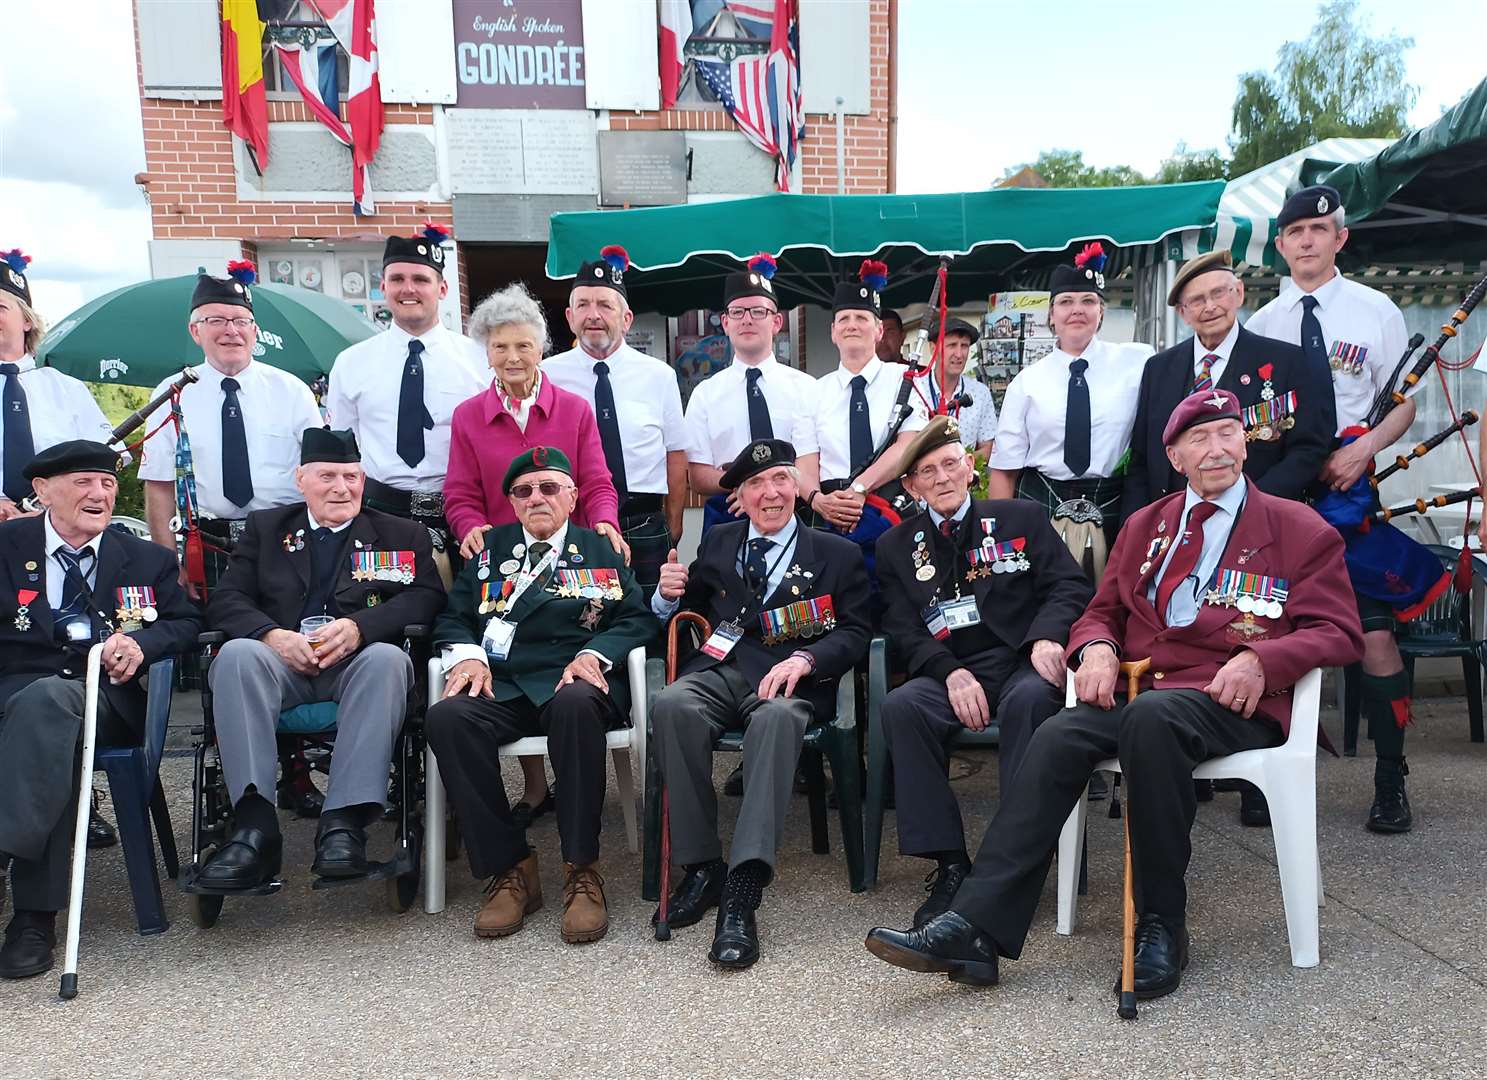 Robbie Larnach (seated, second from right), outside the Café Gondrée at Pegasus Bridge with other veterans and members of Jedburgh Pipe Band, June 2022.